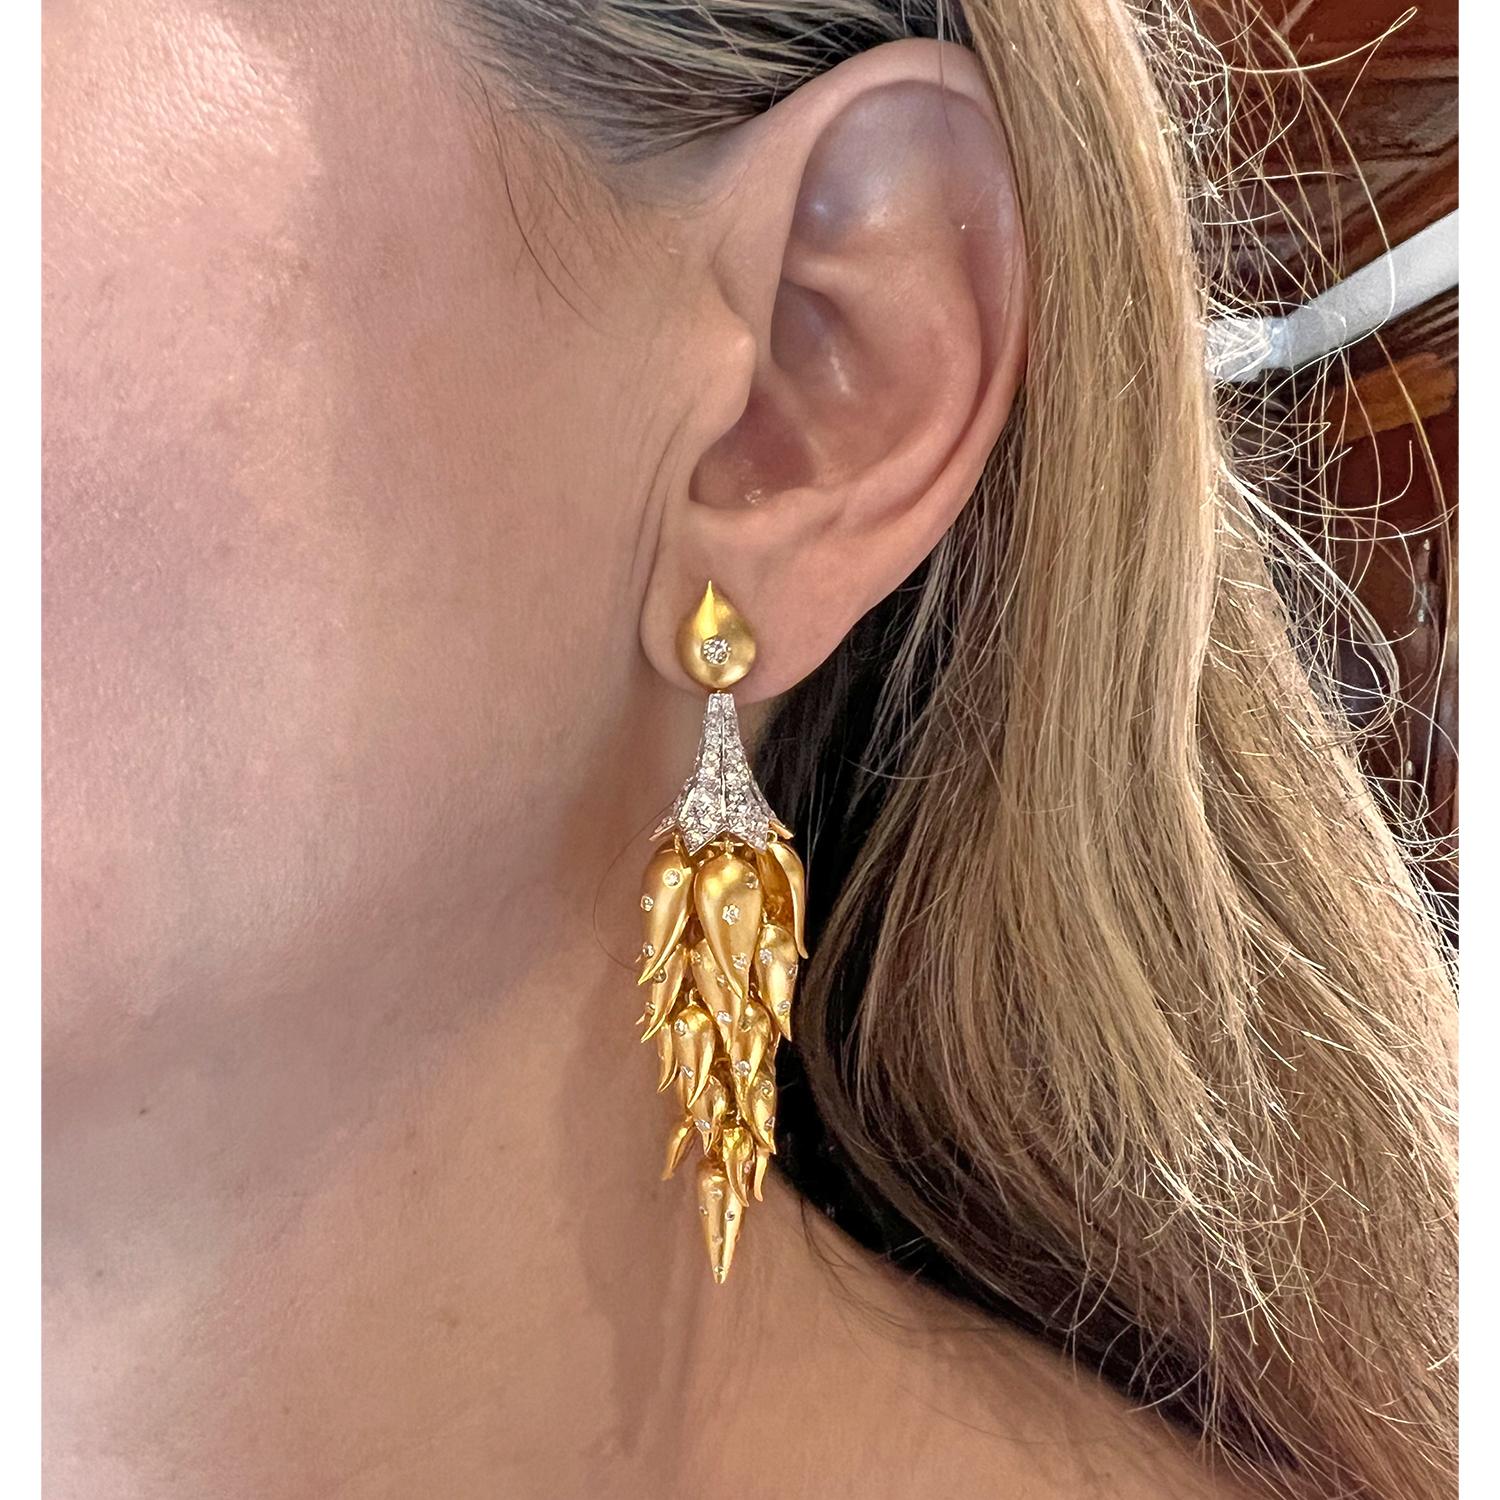 Long drop earrings, featuring a cascade of falling 18k yellow gold leaves each accented by small round brilliant-cut diamonds. The leaves suspended from a pear-shaped 18k yellow gold surmount centering a single round brilliant-cut diamond to a